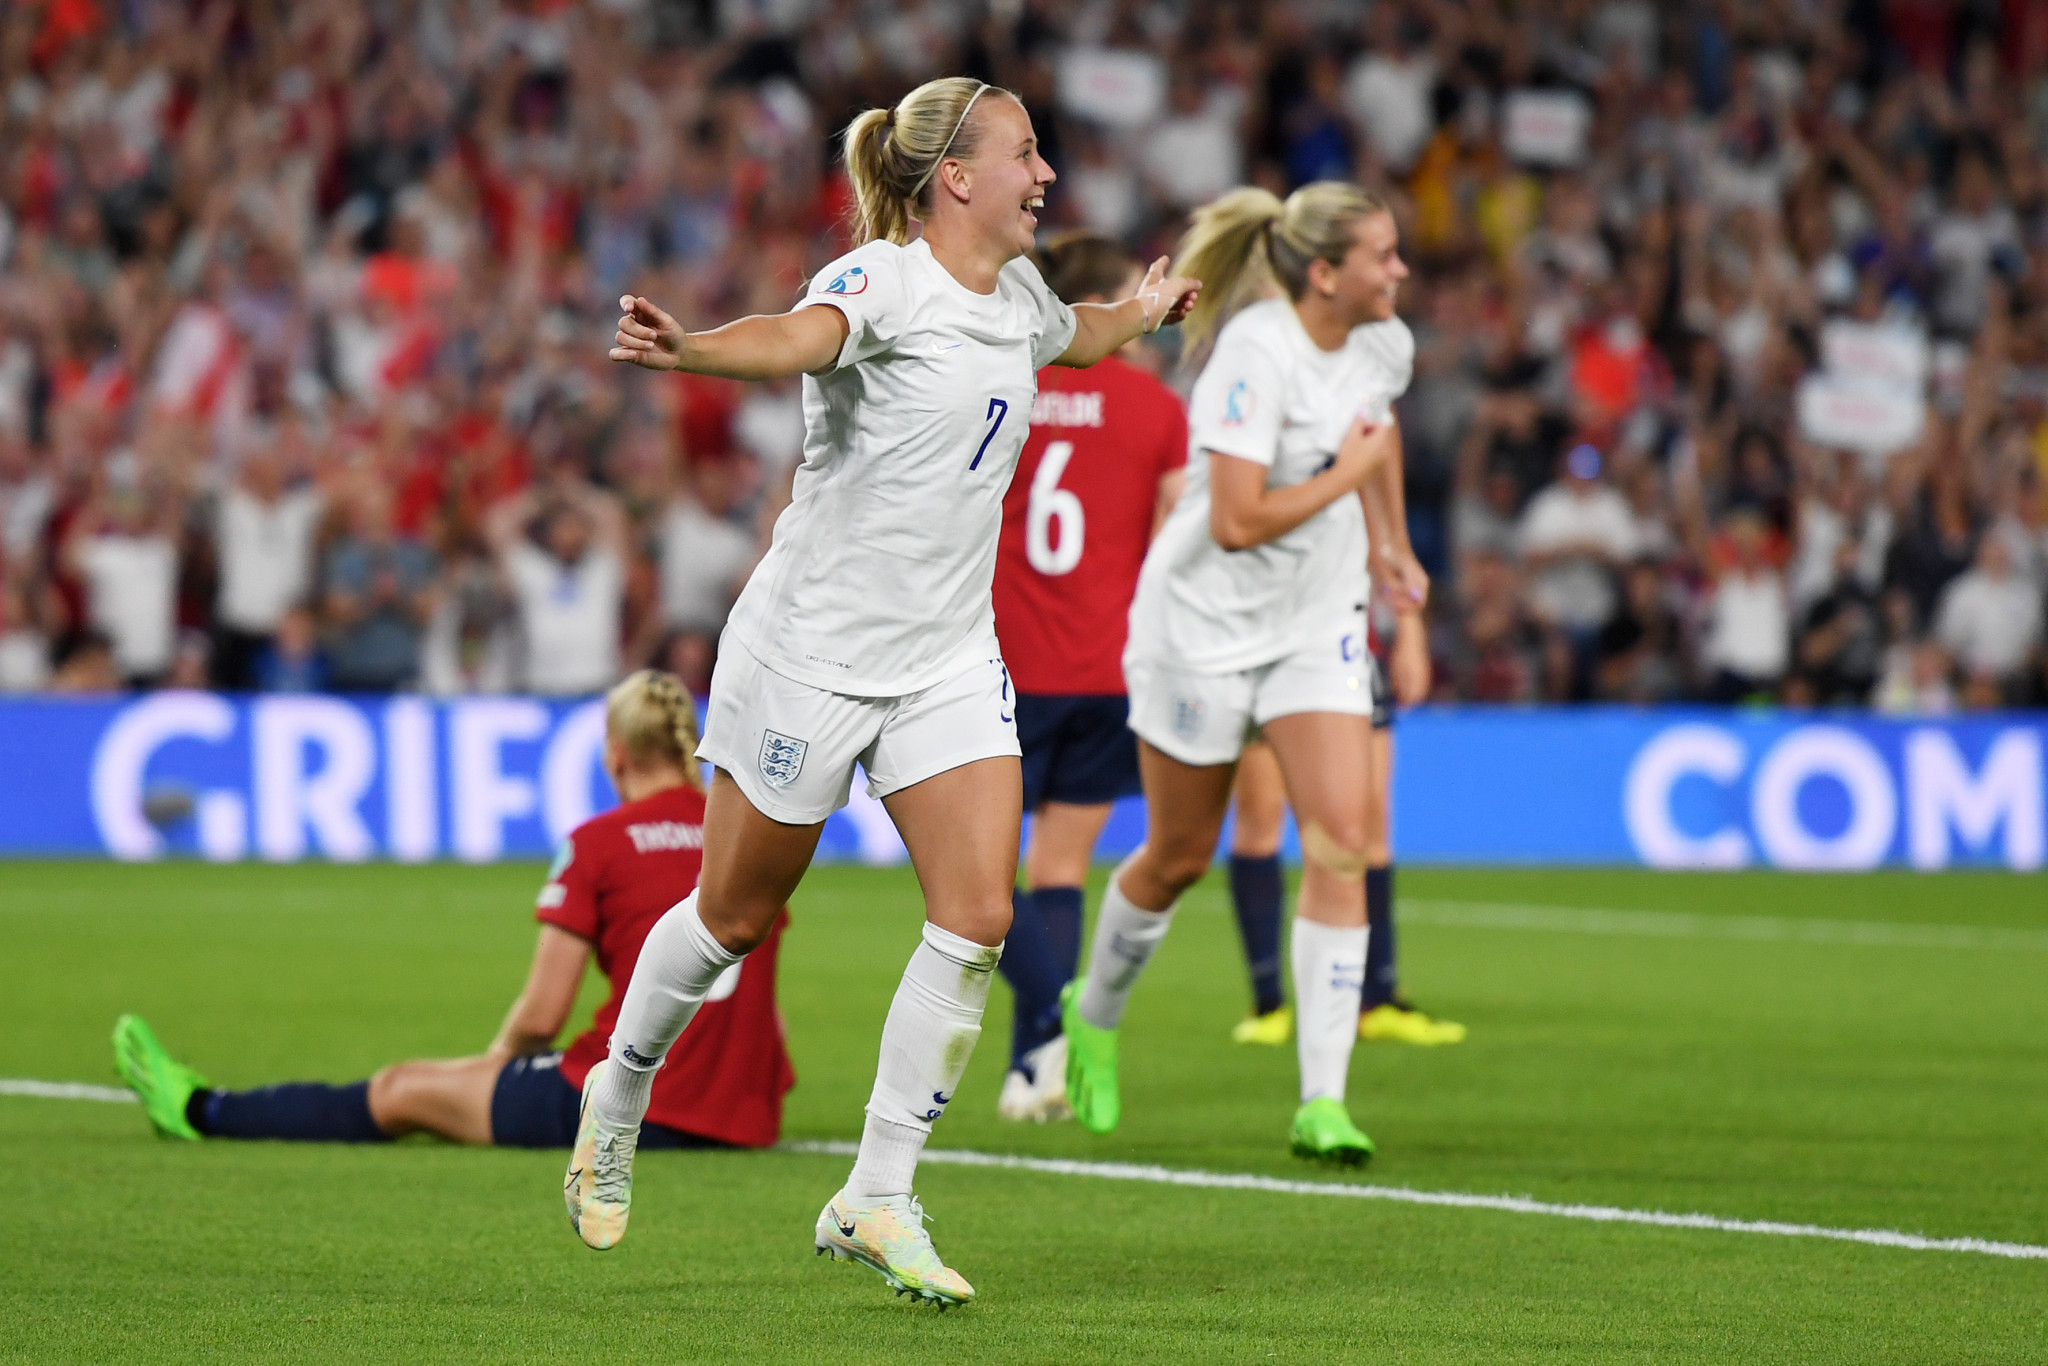 England hammer Norway to reach quarter-finals at UEFA Women’s Euro 2022